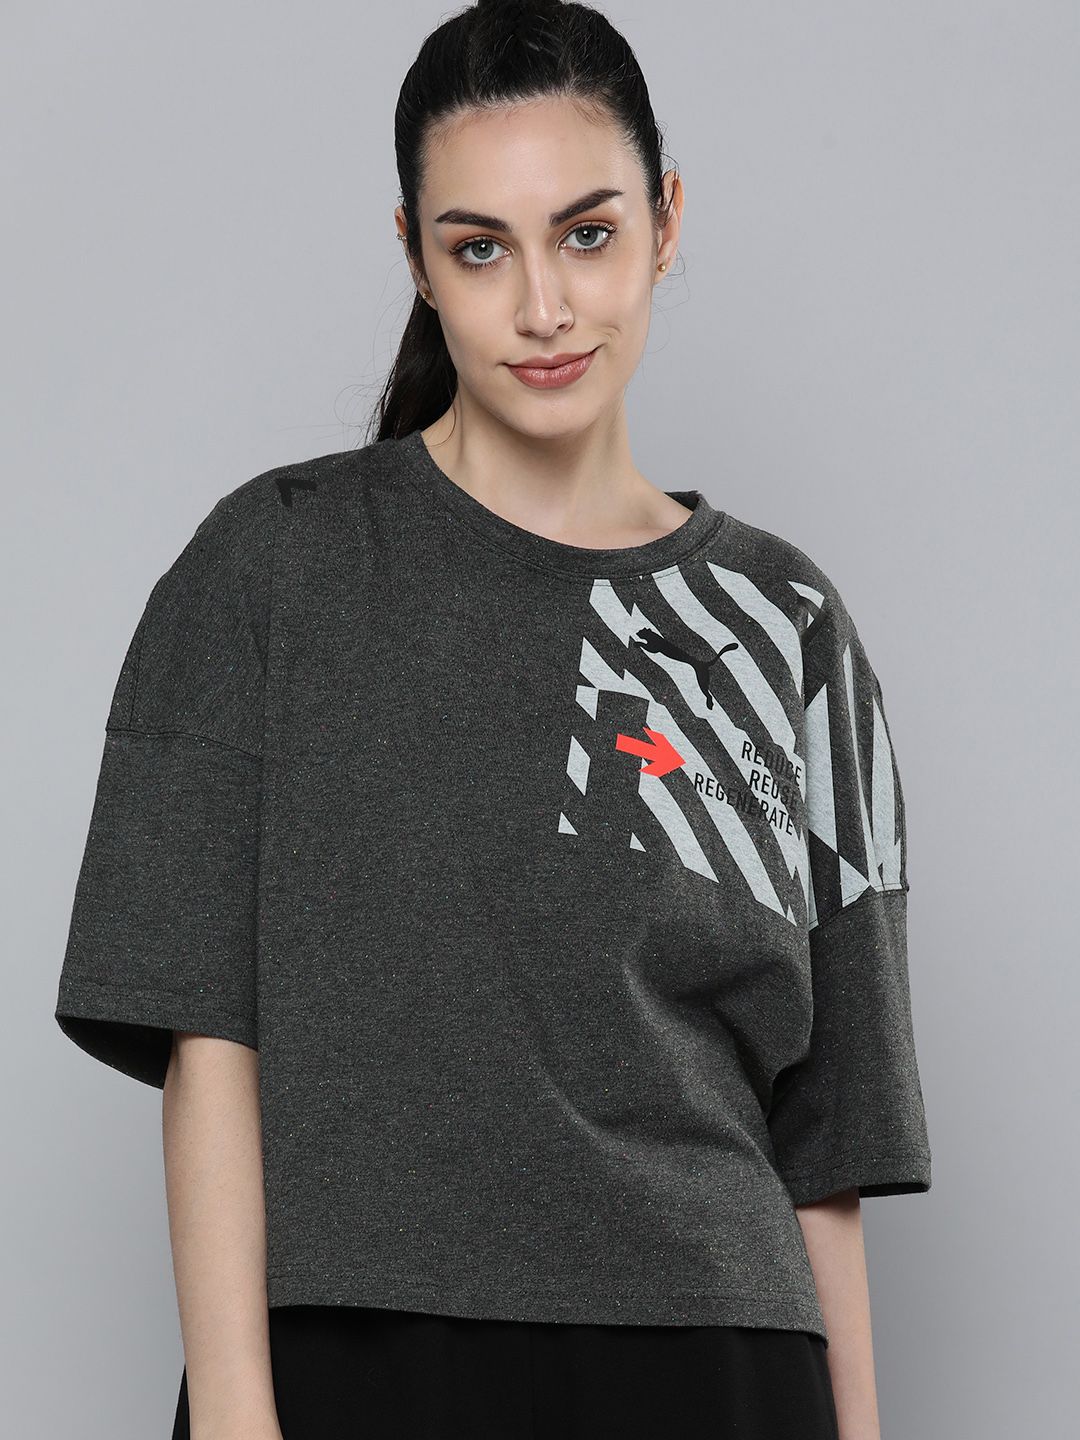 Puma Women Grey & Black Printed RE:Collection Oversized Extended Sleeves T-shirt Price in India